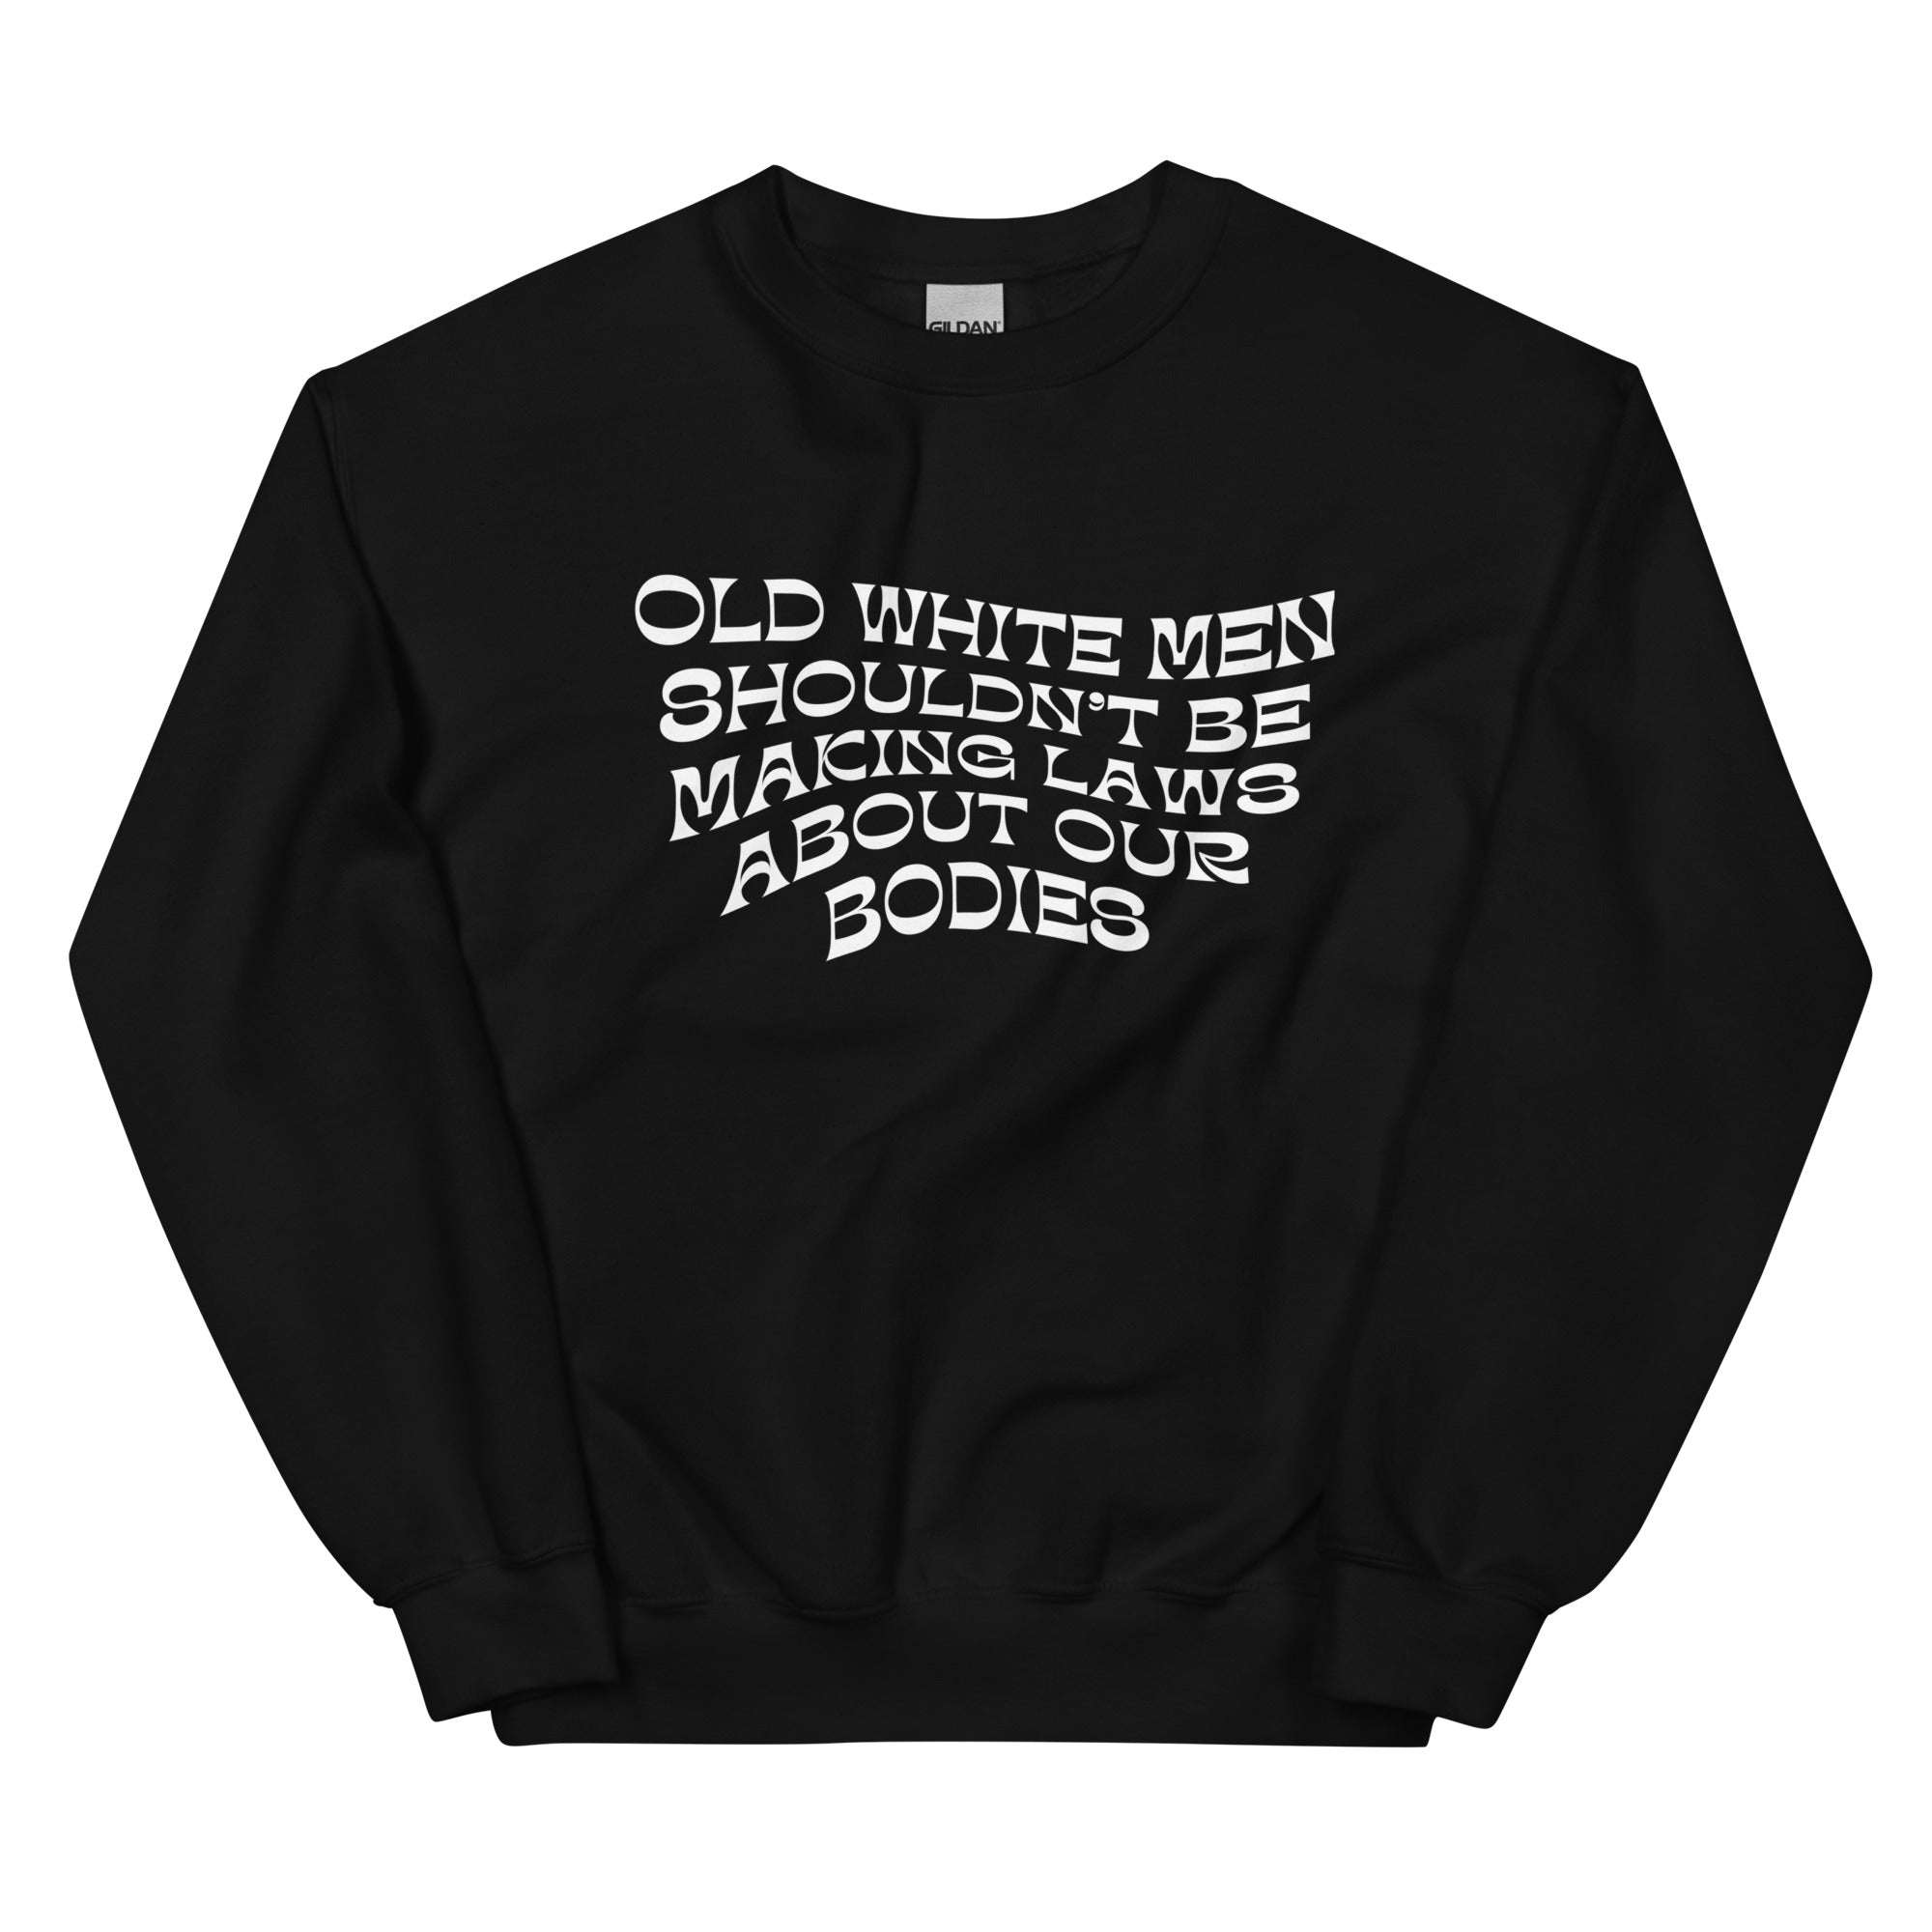 Old White Men Shouldn’t Be Making Laws About Our Bodies Unisex Feminist Sweatshirt- Shop Women’s Rights T-shirts - Feminist Trash Store - Black